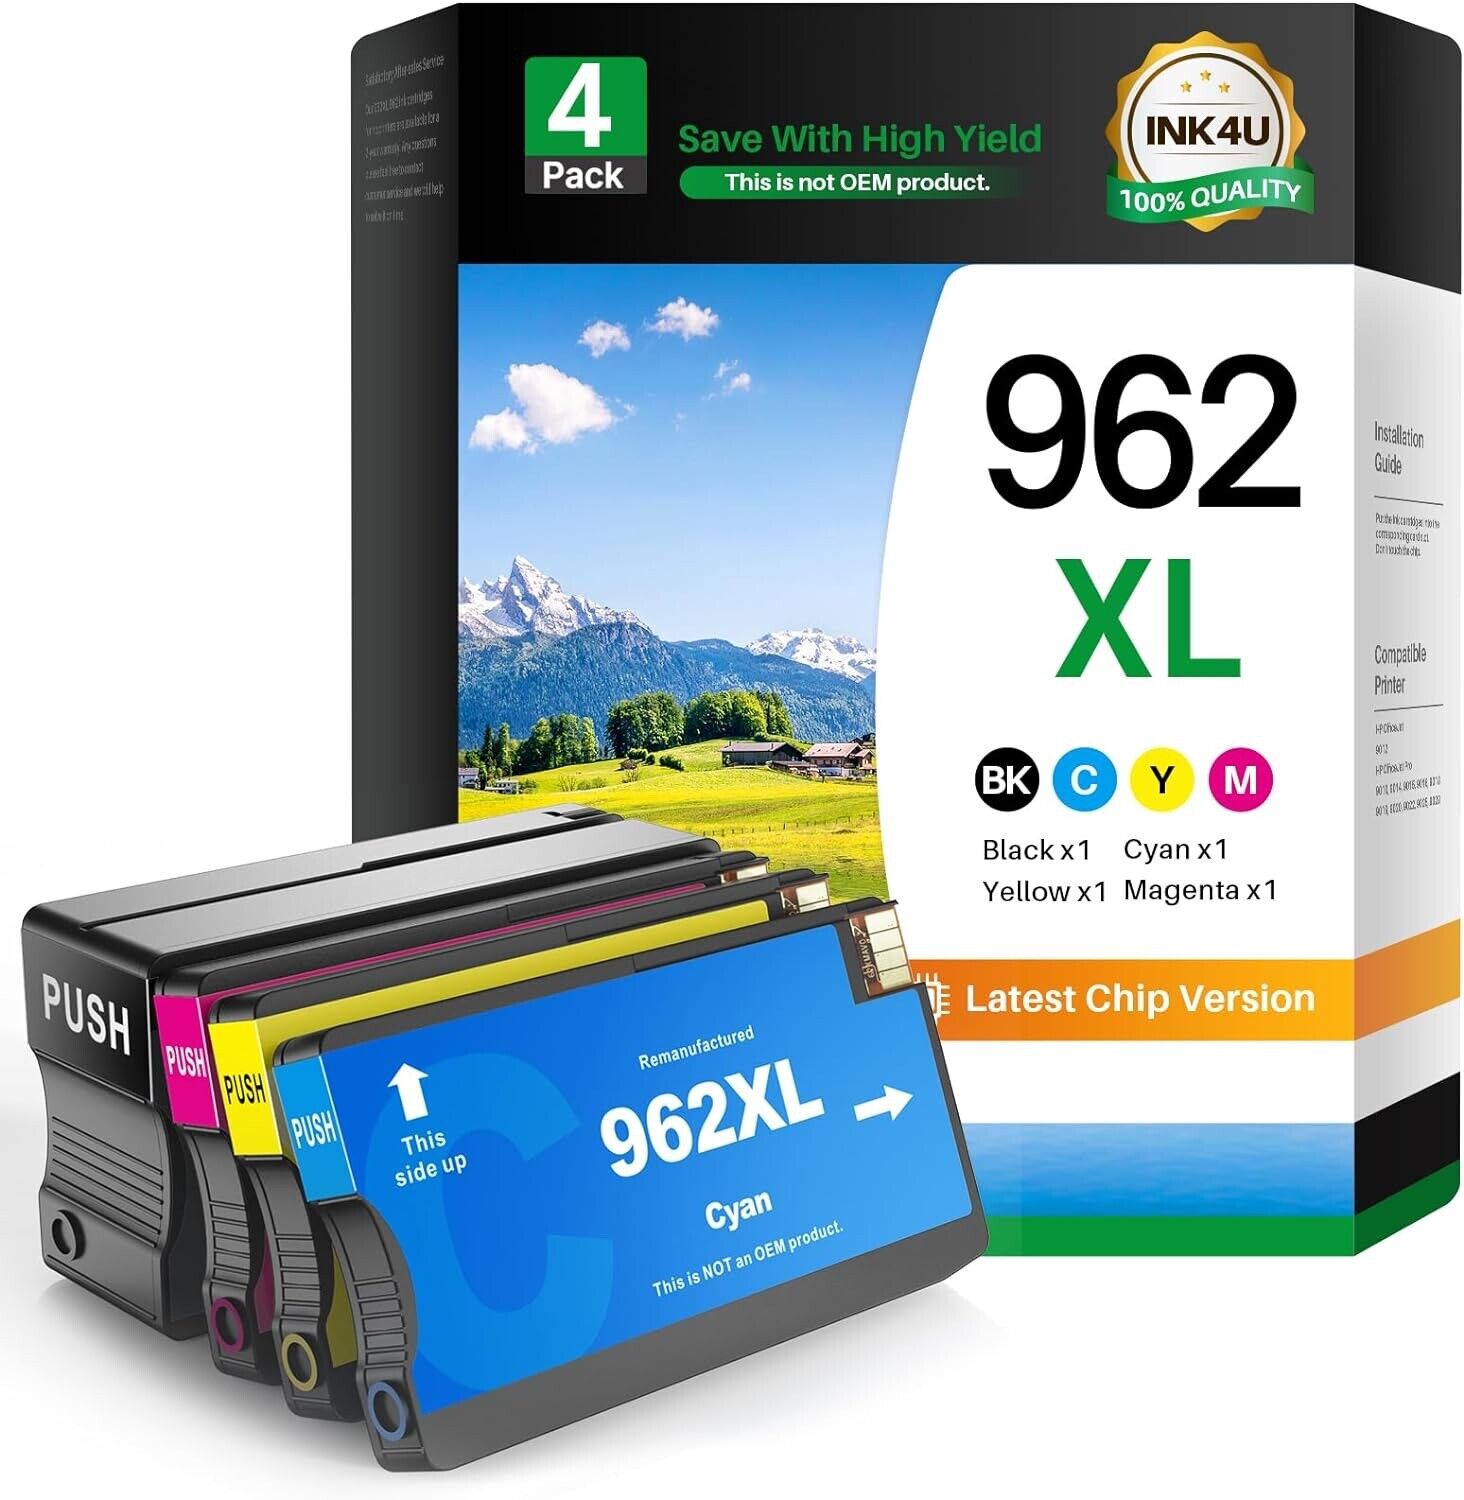 High-Quality Ink4U HP 962XL Compatible Cartridges 4-Pack for OfficeJet Pro - NEW